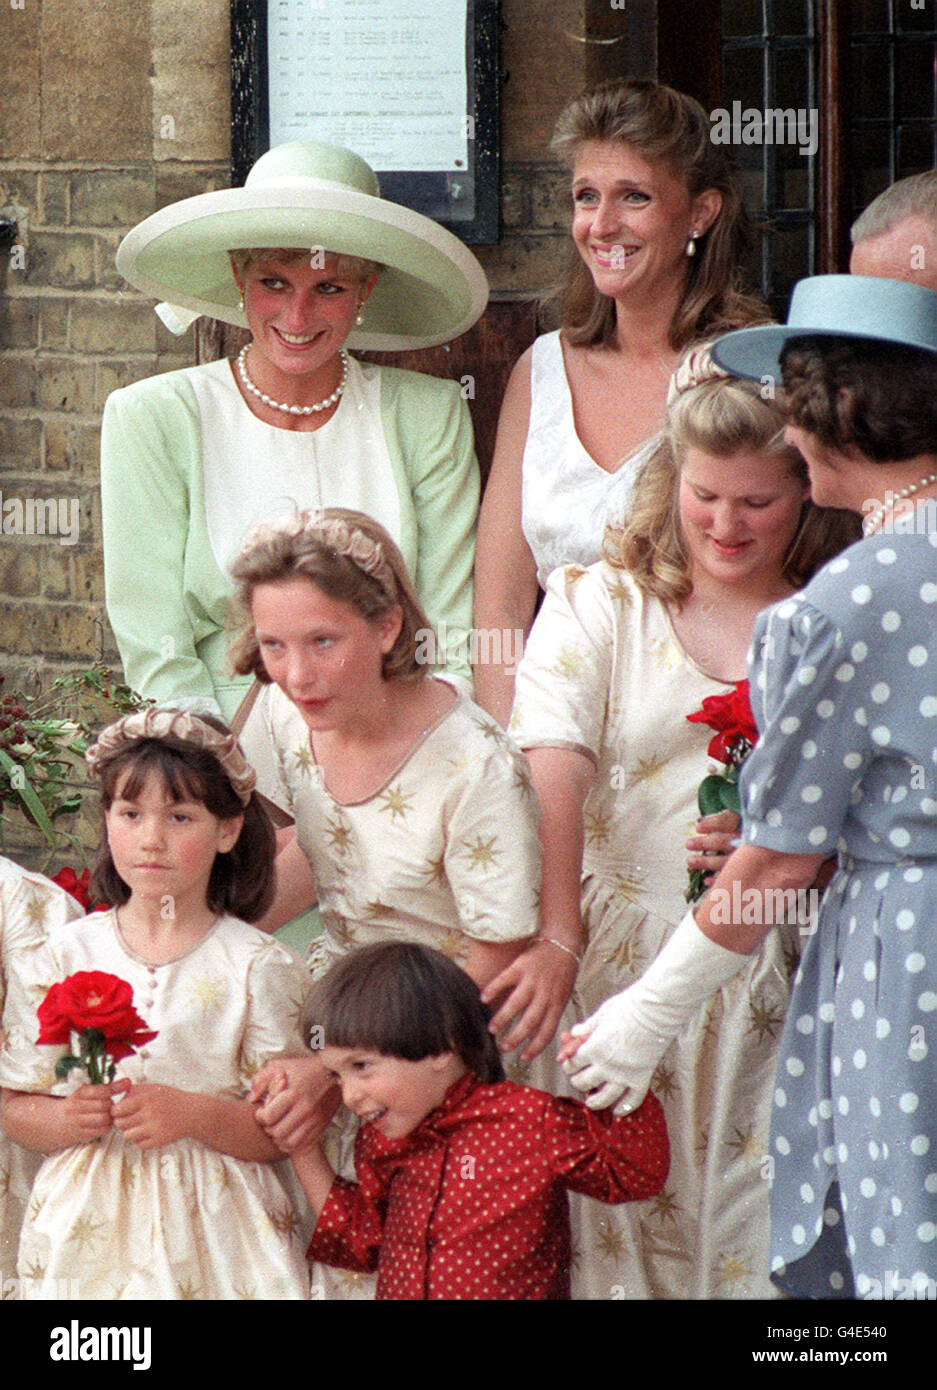 PA NEWS PHOTO 30/8/91 DIANA, THE PRINCESS OF WALES AT THE WEDDING OF HER FORMER FLAT-MATE VIRGINIA PITMAN TO BANKER HENRY CLARKE AT CHRIST CHURCH IN CHELSEA, LONDON. WITH HER IS ANOTHER OF HER OLD FLAT-MATES SOPRANO CAROLYN BARTHOLOMEW Stock Photo